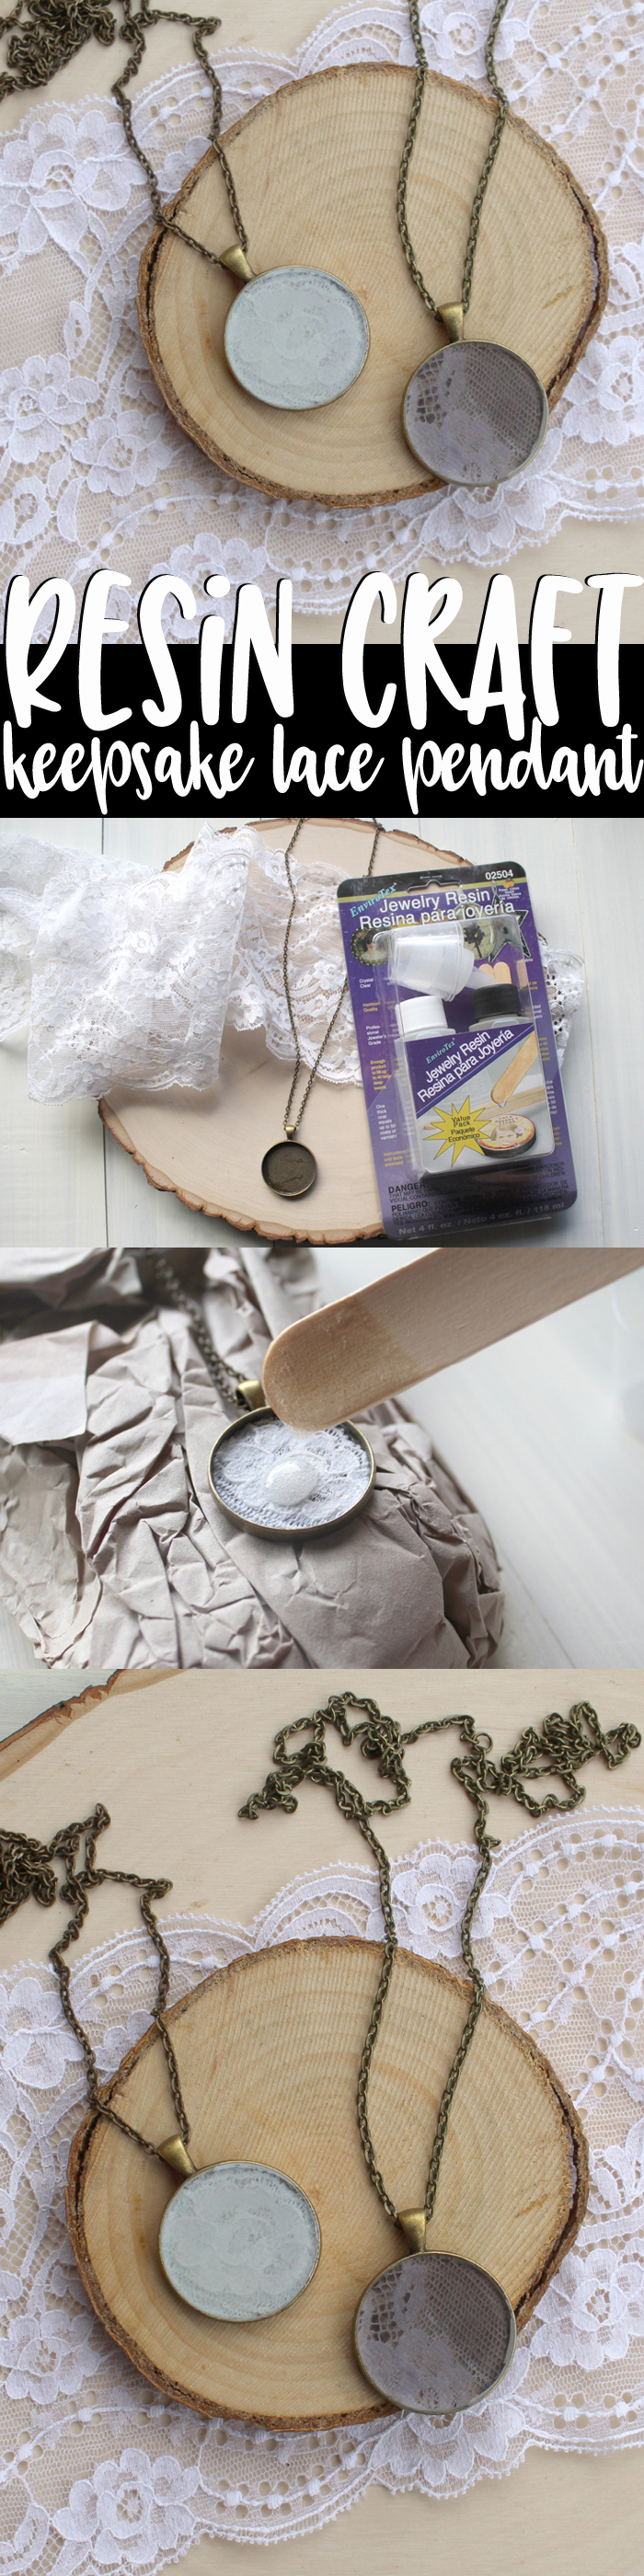 Create a keepsake using lace and jewelry resin!  Cut a piece of grandma's blouse, a doily or a wedding dress and make a stunning pendant! via @resincraftsblog